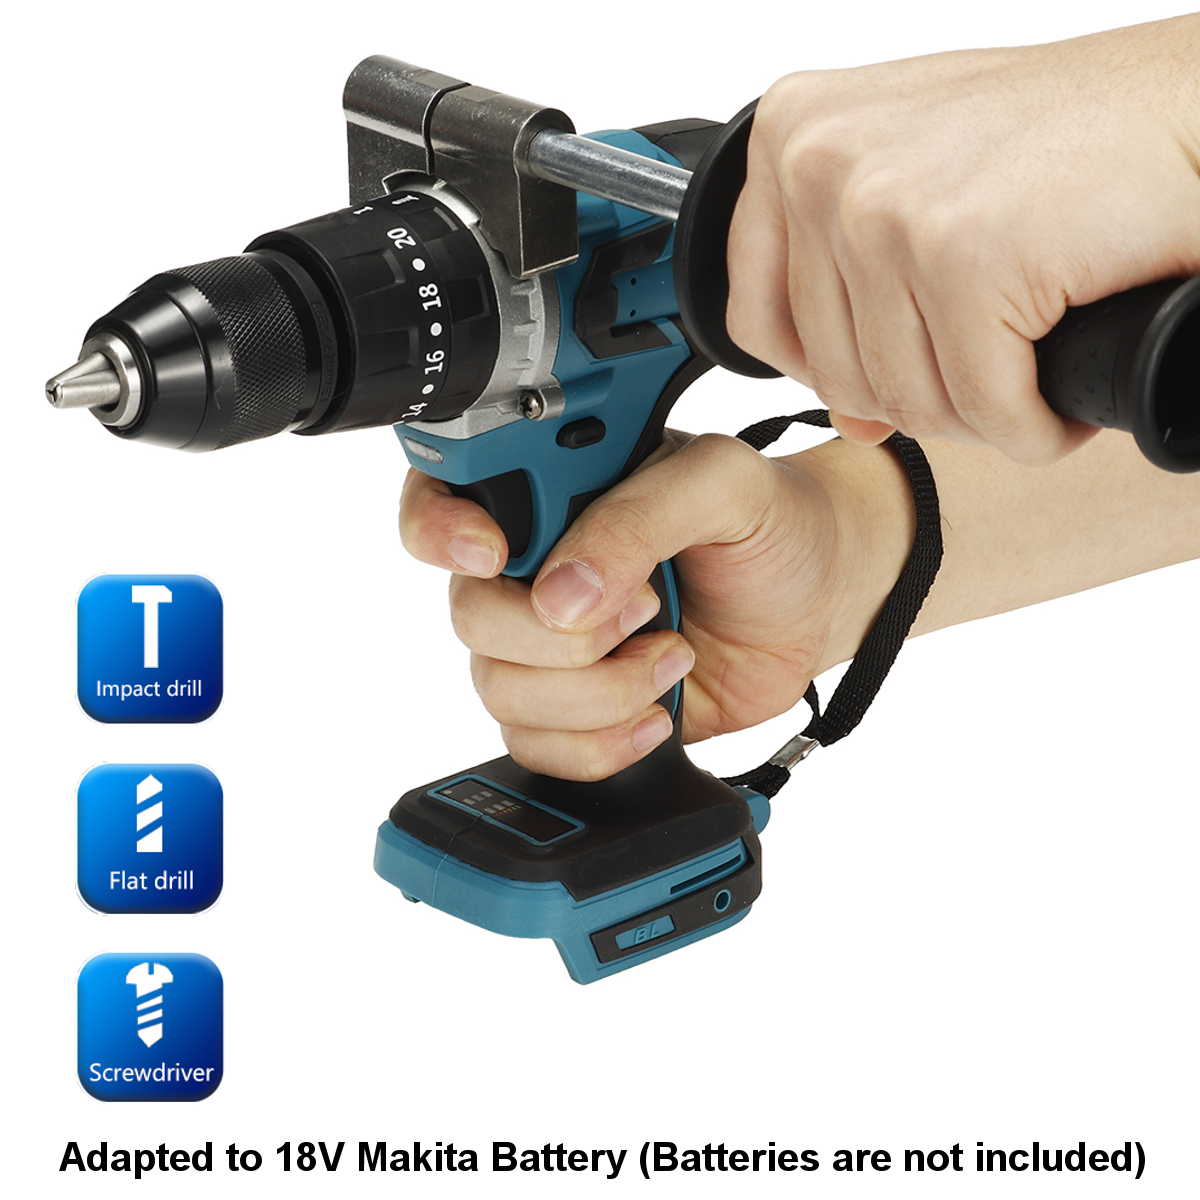 Brushless-Electric-Drill-20-Torque-520NM-Cordless-Screwdriver-13mm-Chuck-Power-Drill-for-Makita-18V--1801609-6